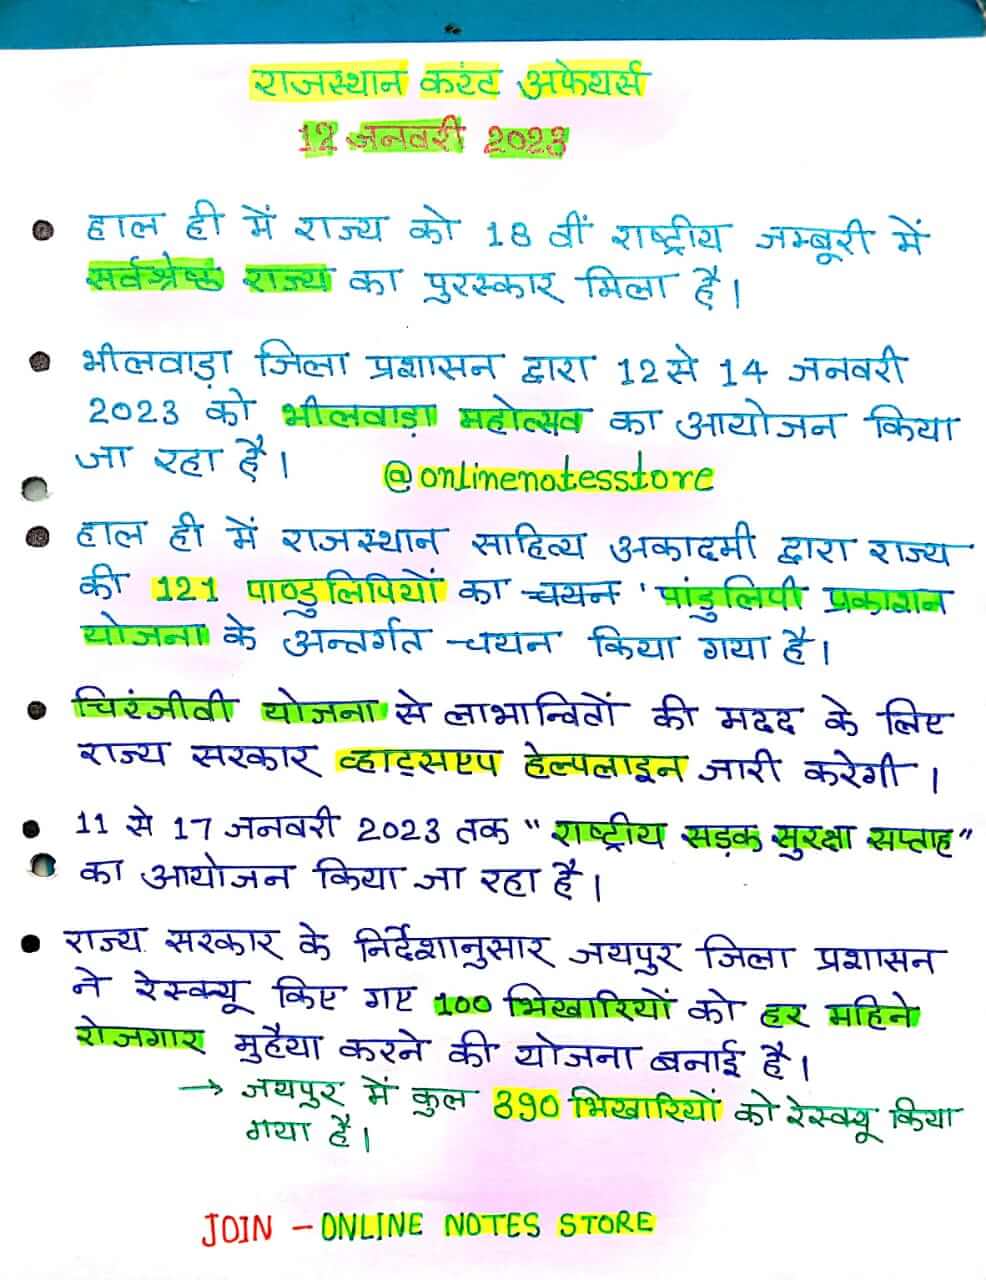 11-20 January 2023 Rajasthan Current Affairs in Hindi PDF |11-20 January 2023 करंट अफेयर्स | Rajasthan Current Affairs Quiz 11-20 January 2023 | Today Current Affairs 11-20 January 2023 | Current Affairs India - 11-20 January 2023 | Current Affairs in Hindi | Today Current Affairs Questions PDF | Current Affairs - Online Notes Store | Rajasthan Current Affairs - 2023